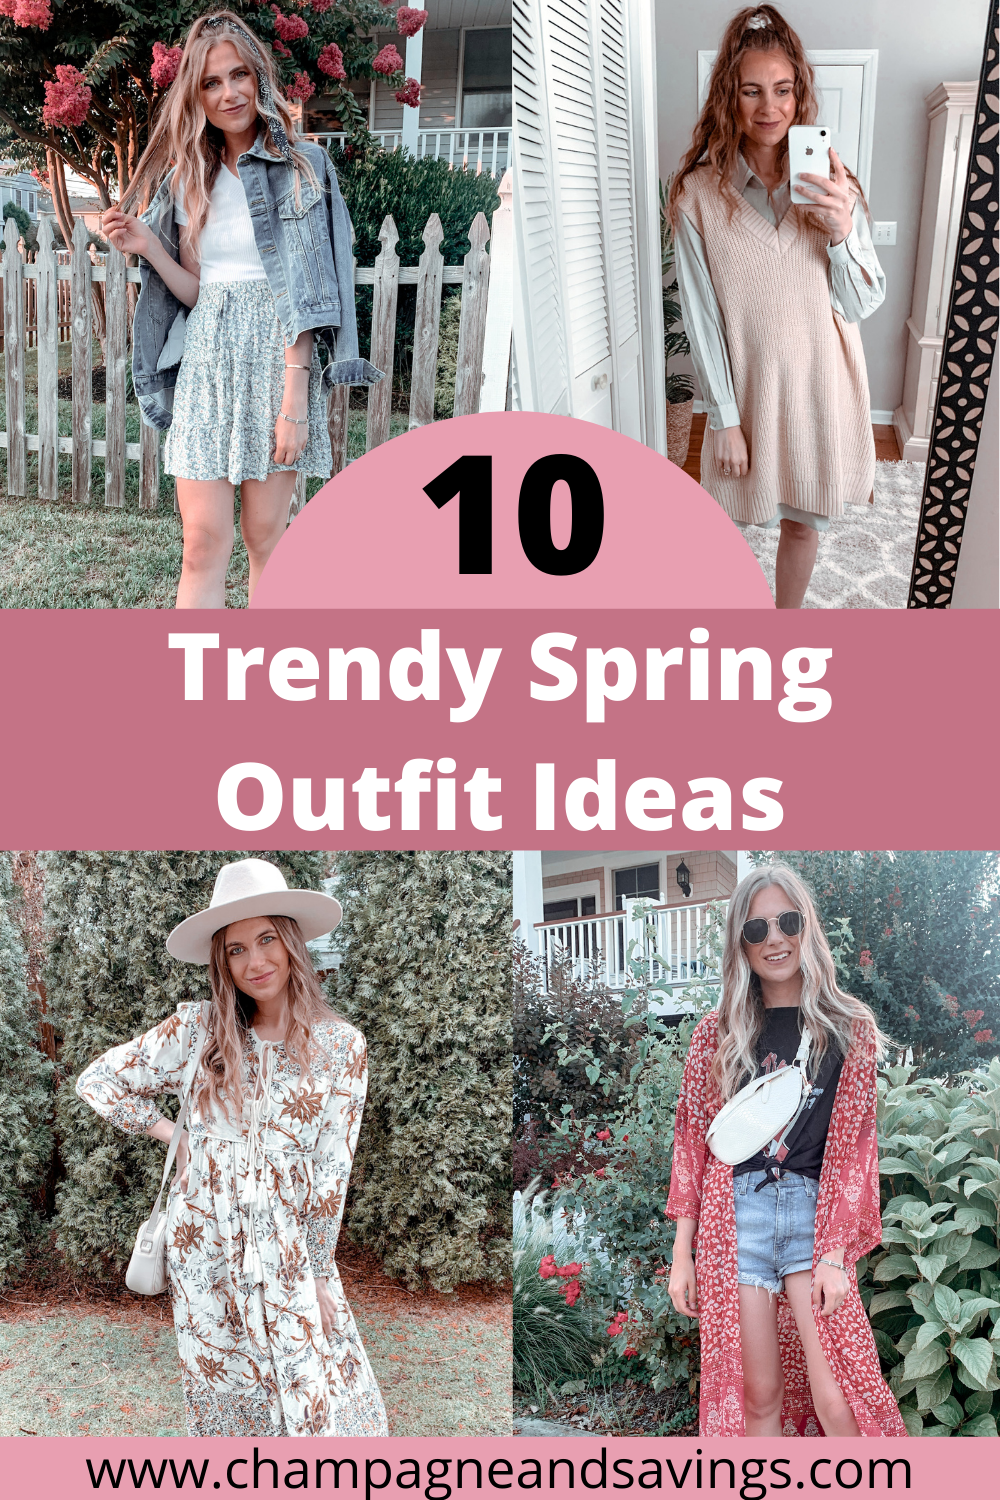 Spring Outfit Ideas For 2021 That Are Affordable & Trendy